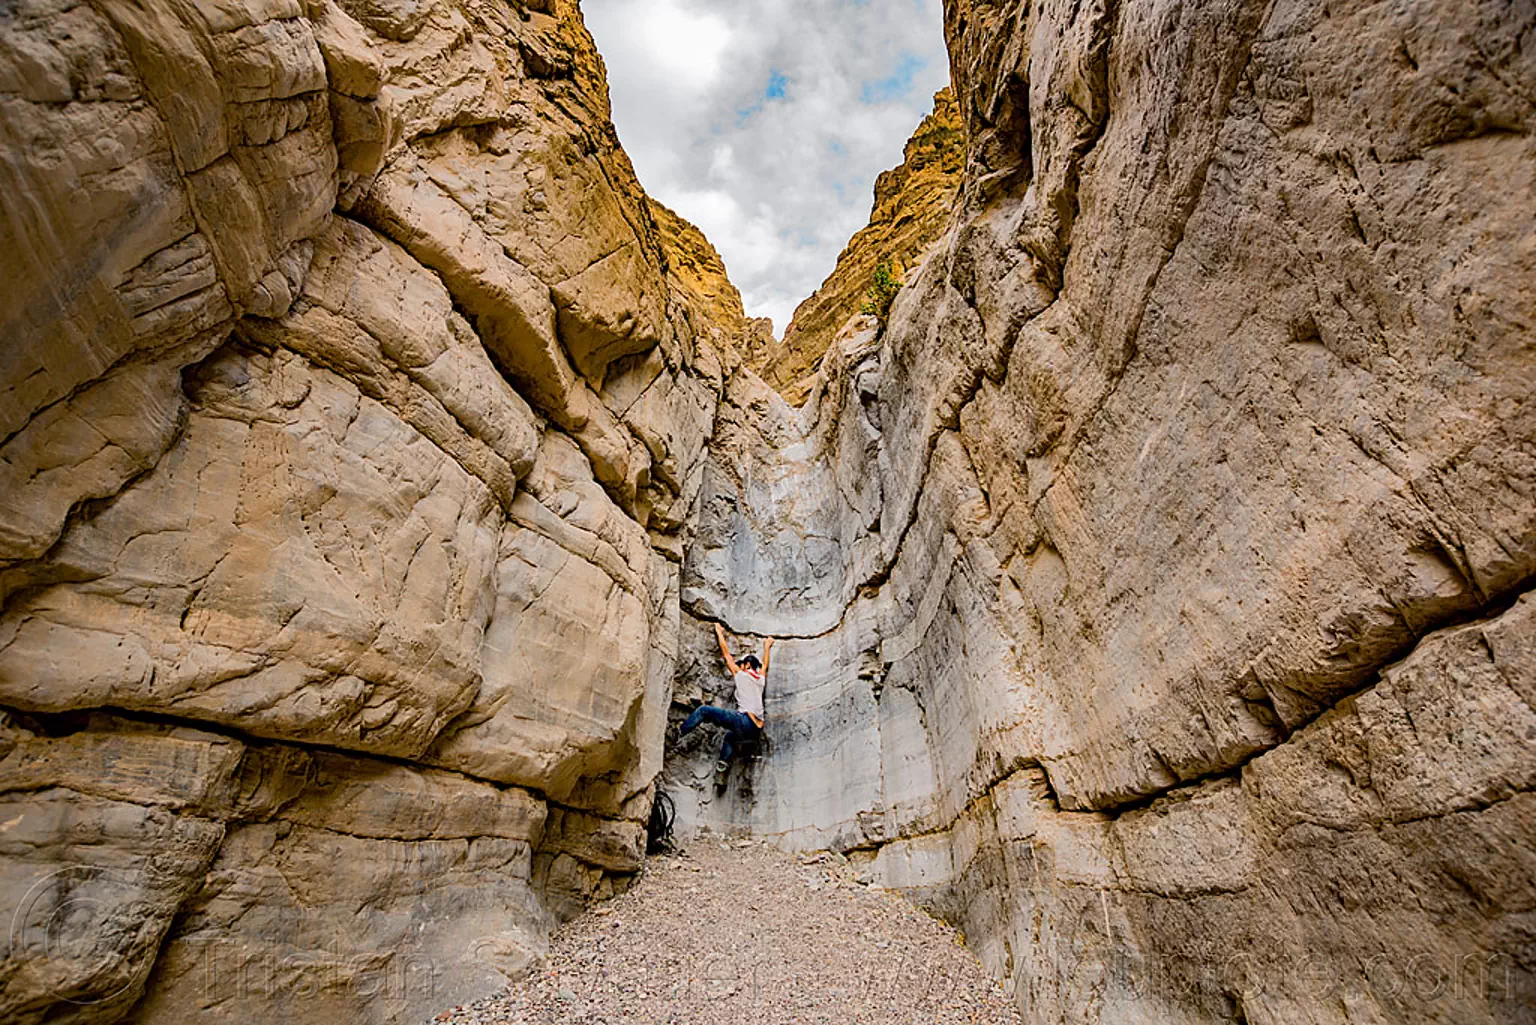 rock climbing the dry waterfall - fall canyon - death valley national park (california), cliff, death valley, fall canyon, hiking, rock-climbing